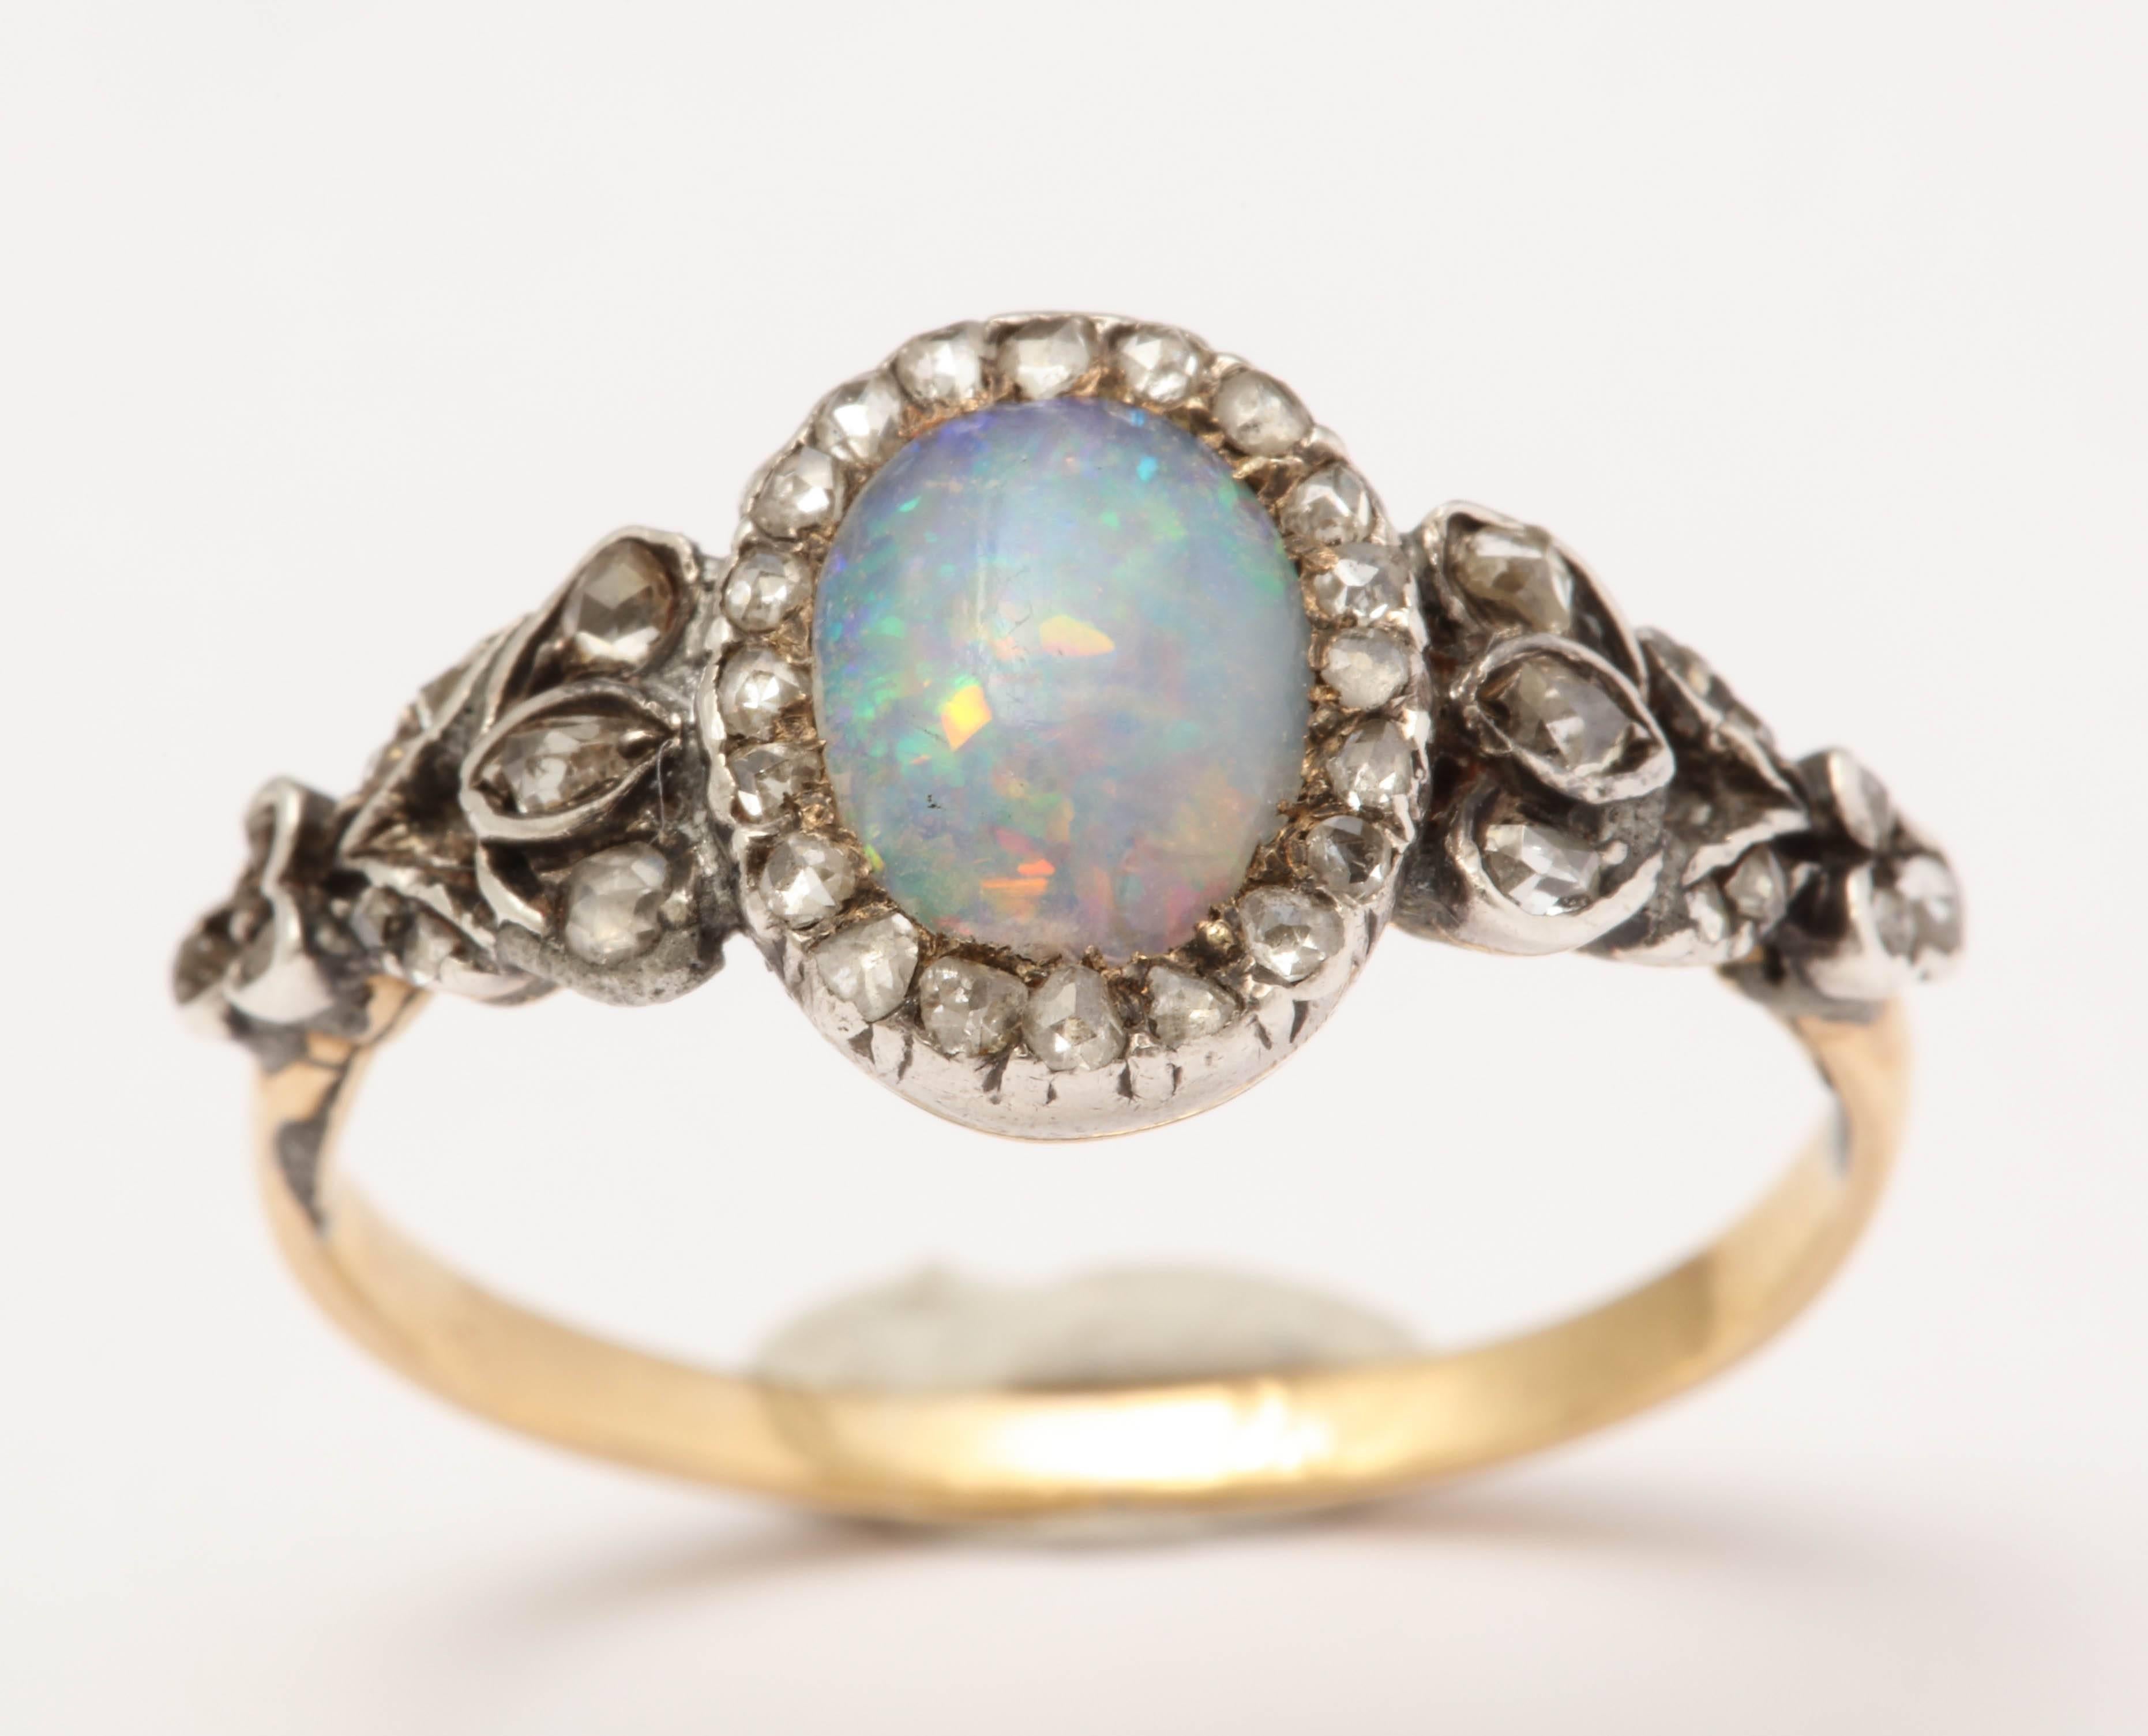 Beautiful opal surrounded with rosecut diamonds and rosecuts throughout the shoulders. Set in silver over yellow gold in closed back setting. 